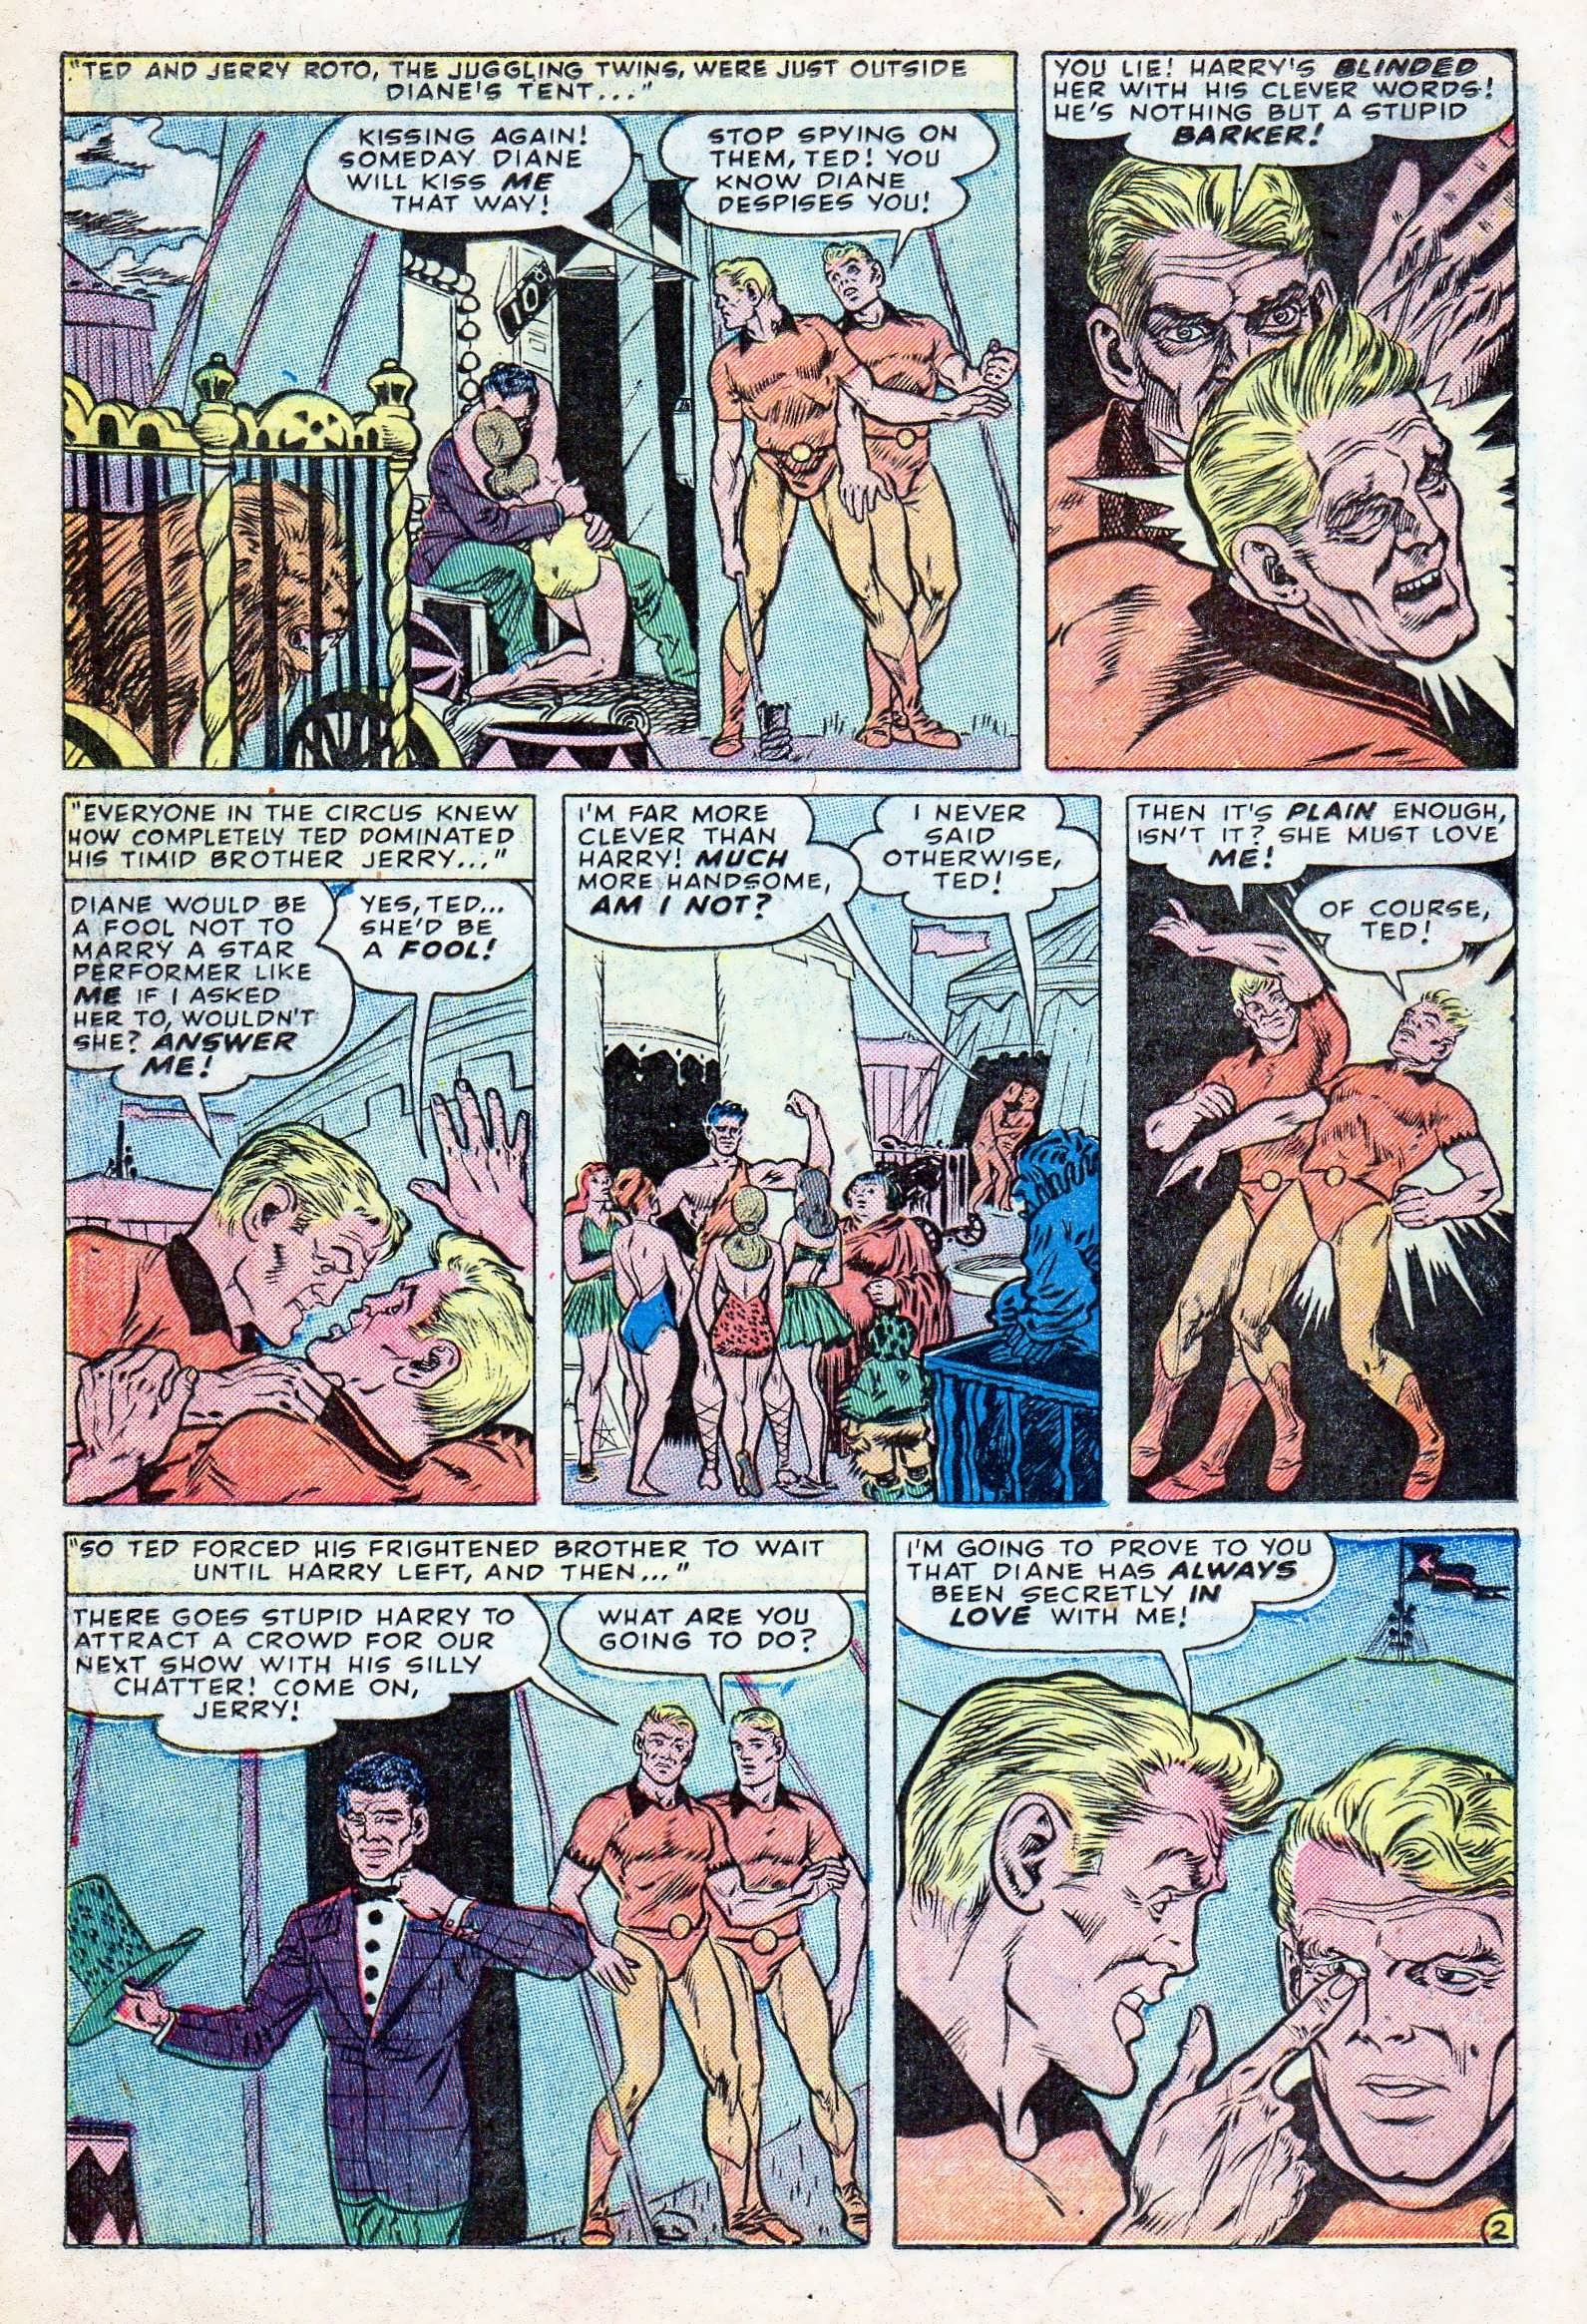 Marvel Tales (1949) 120 Page 17